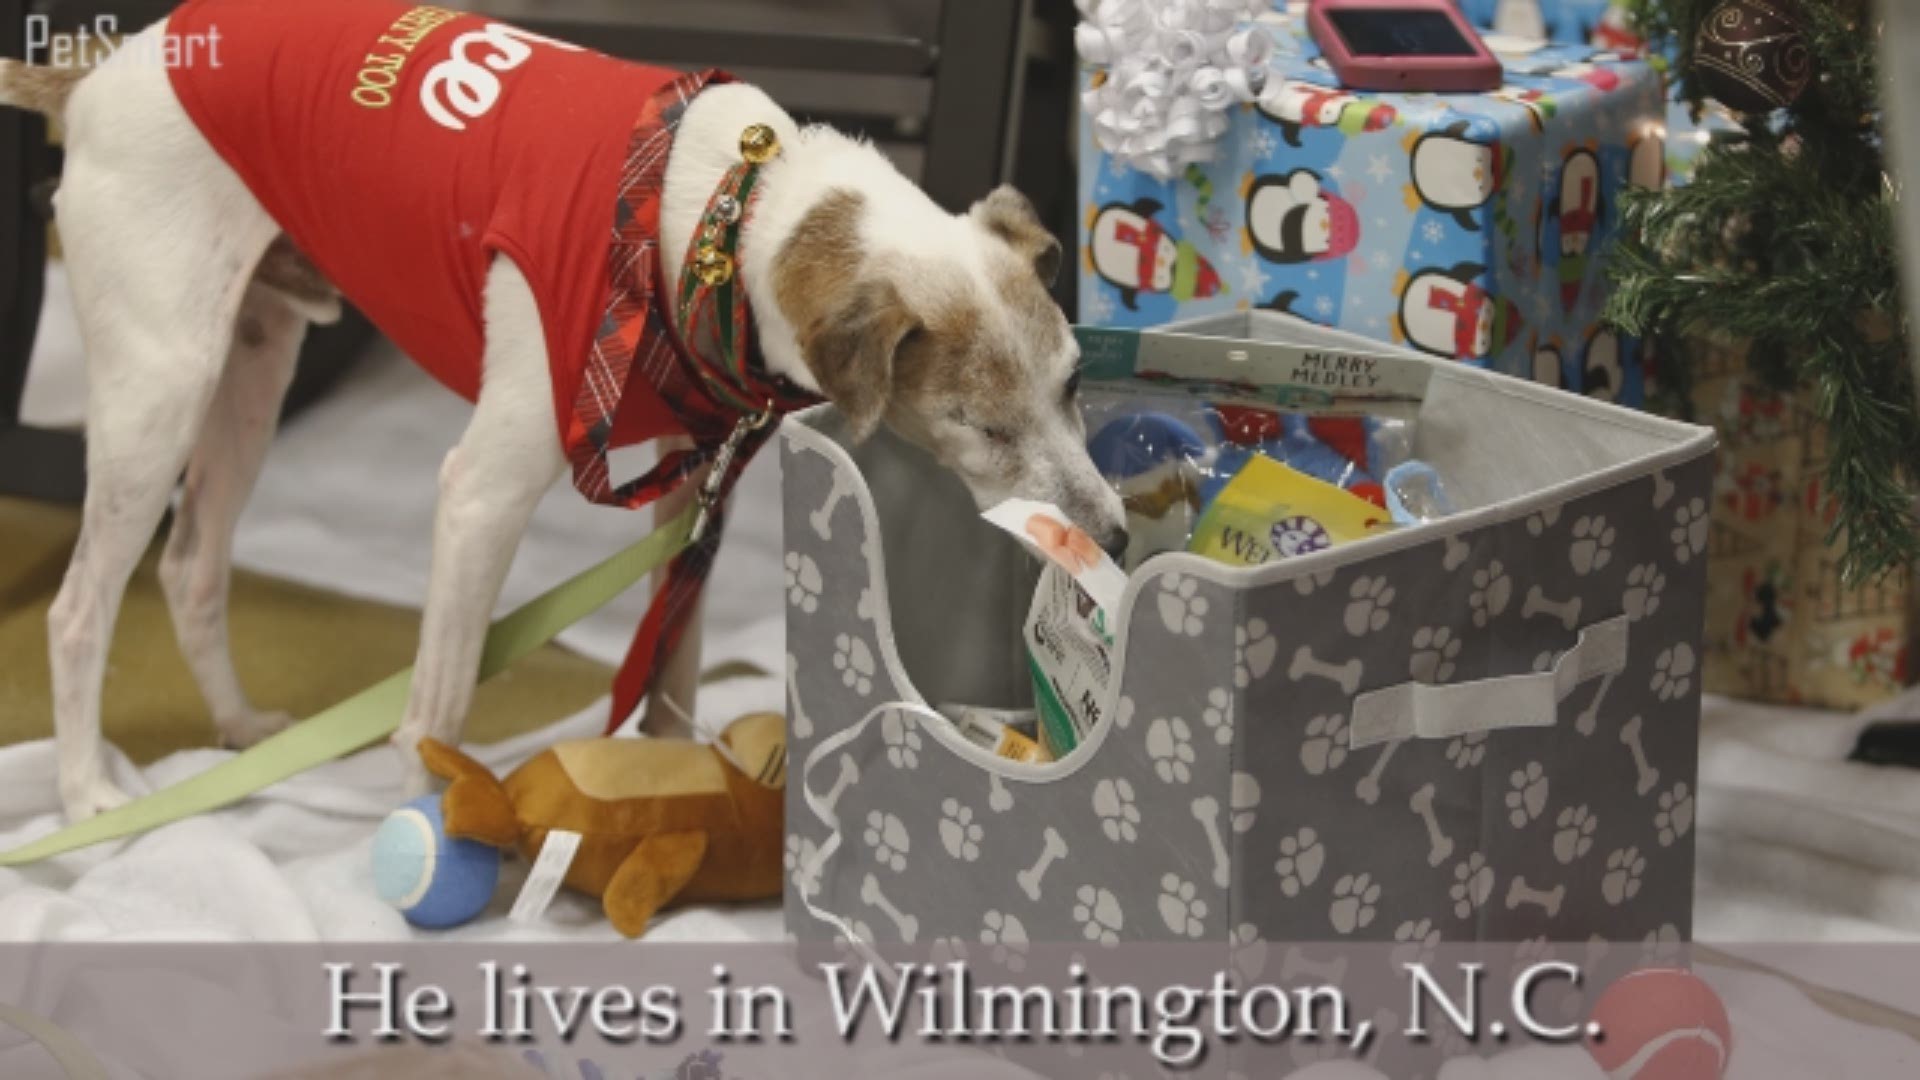 The people at PetSmart threw Jack an early Christmas celebration in Wilmington. He may not make it to the holiday.